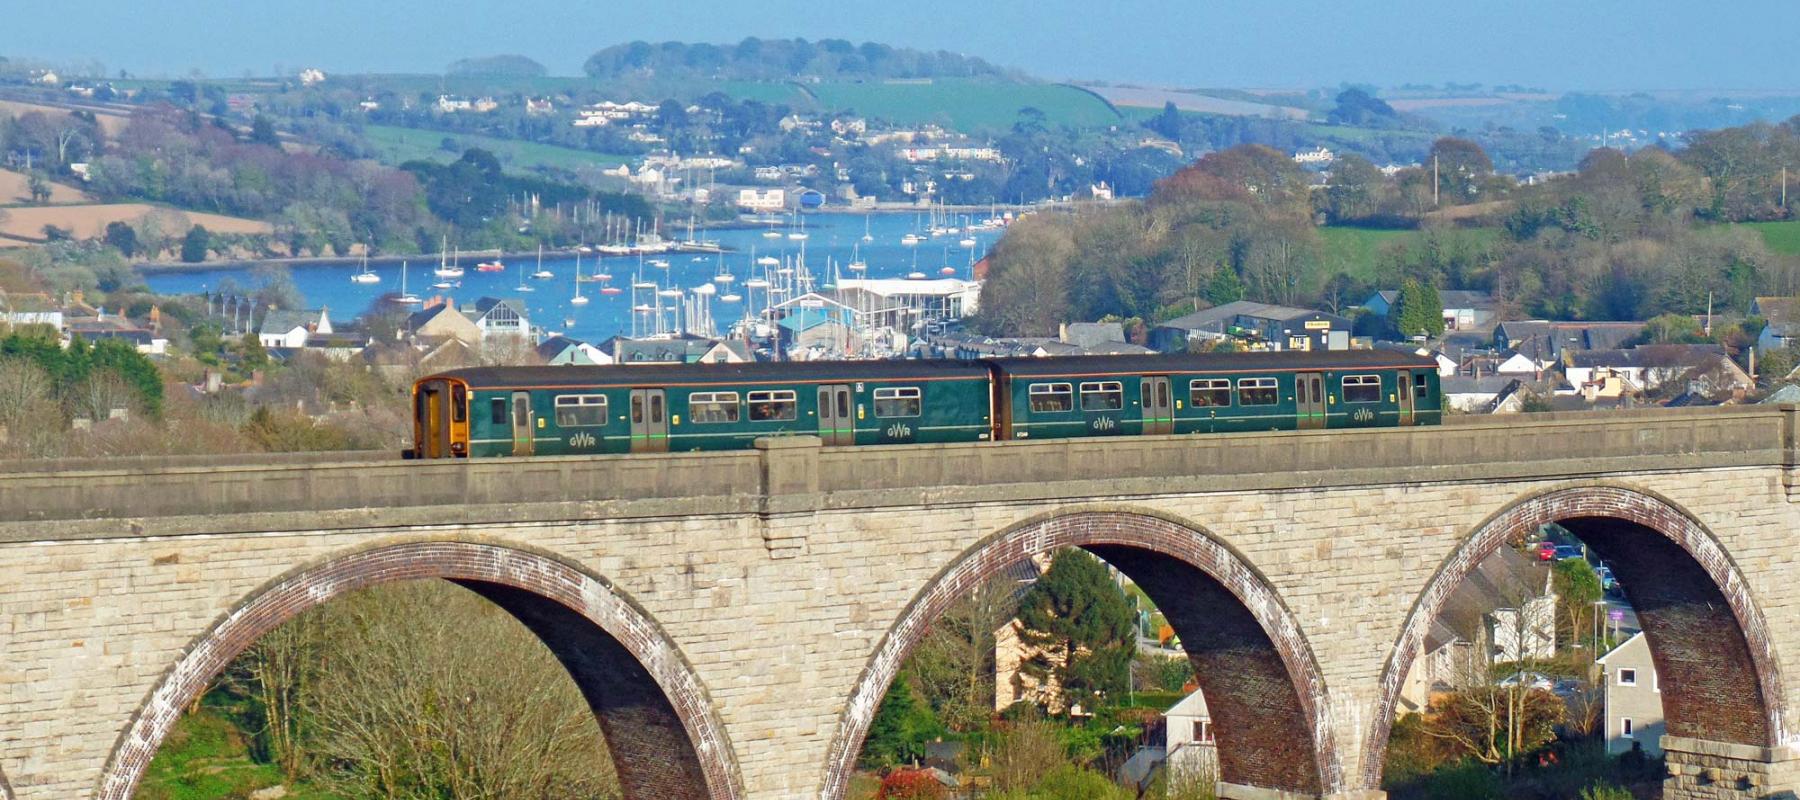 Train on Collegewood Viaduct on the Maritime Line between Truro and Falmouth